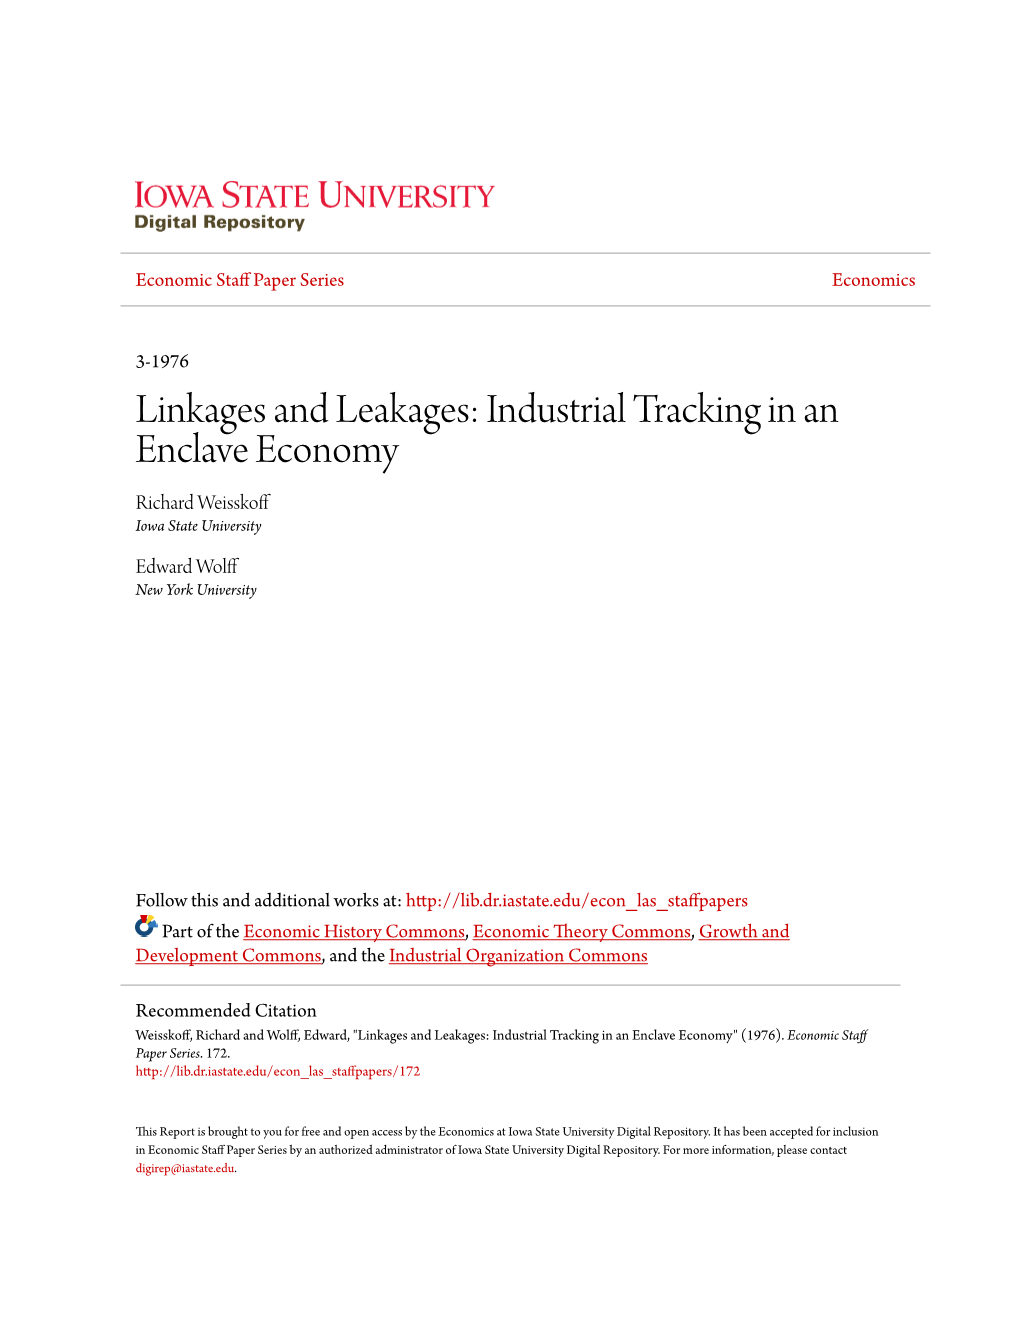 Linkages and Leakages: Industrial Tracking in an Enclave Economy Richard Weisskoff Iowa State University